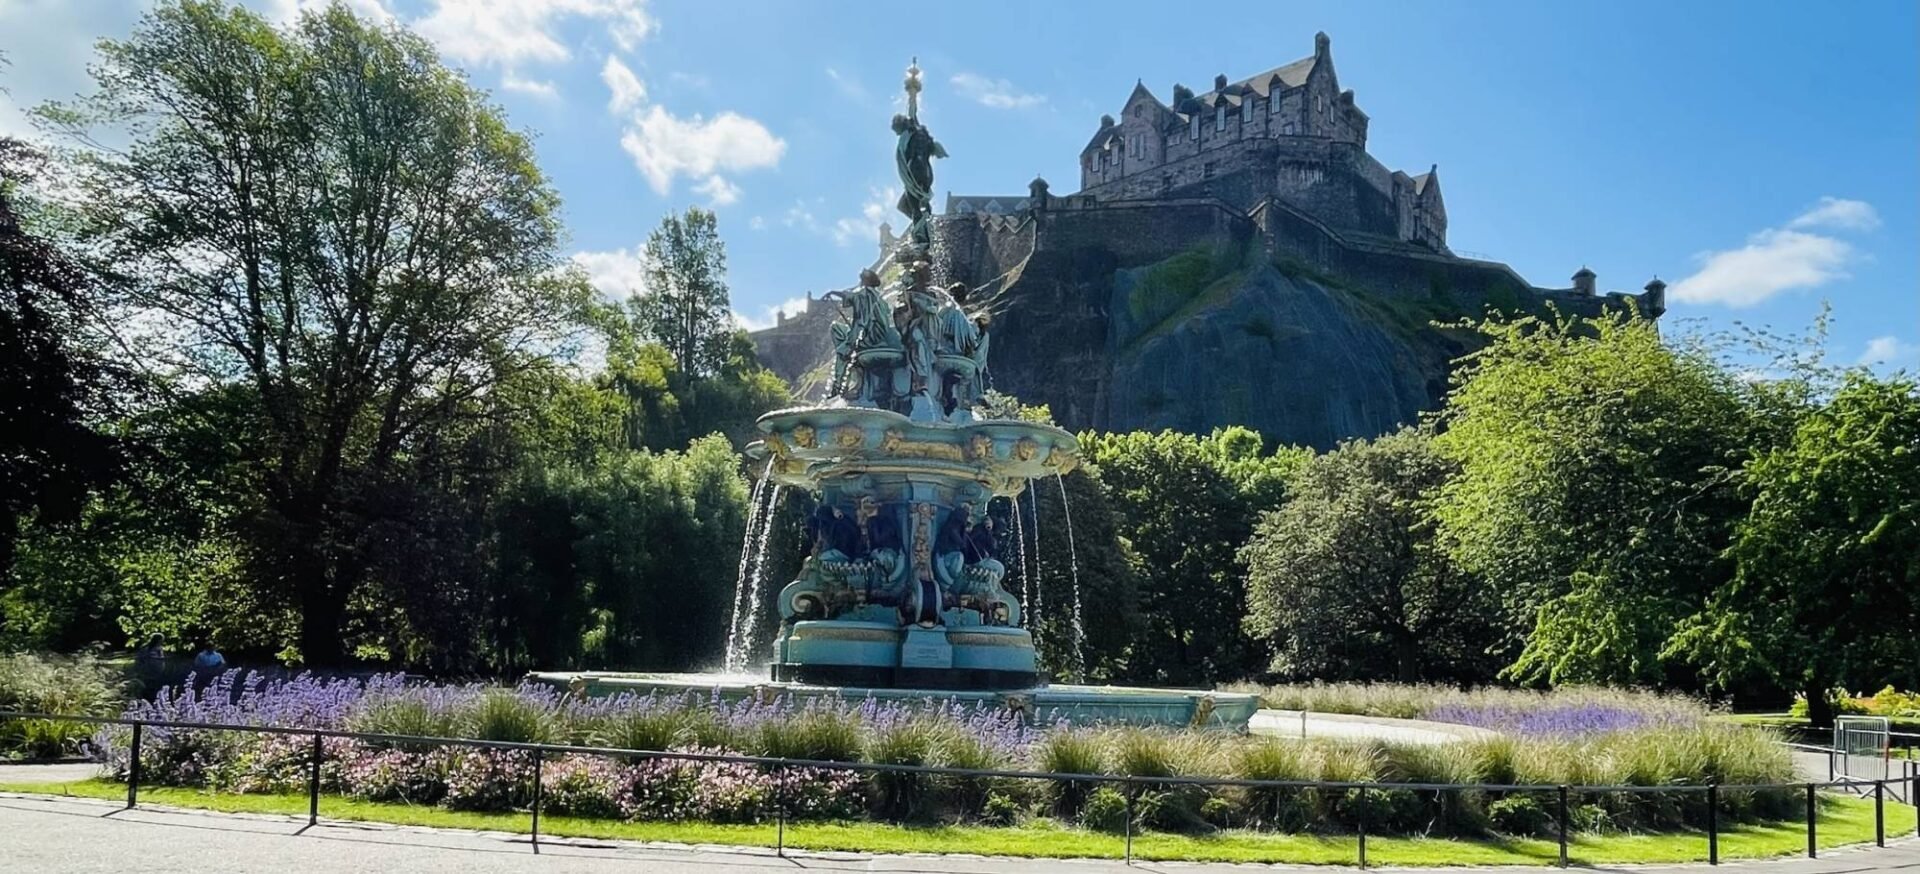 Fountain in front of Edinburgh Castle on a Summer's day